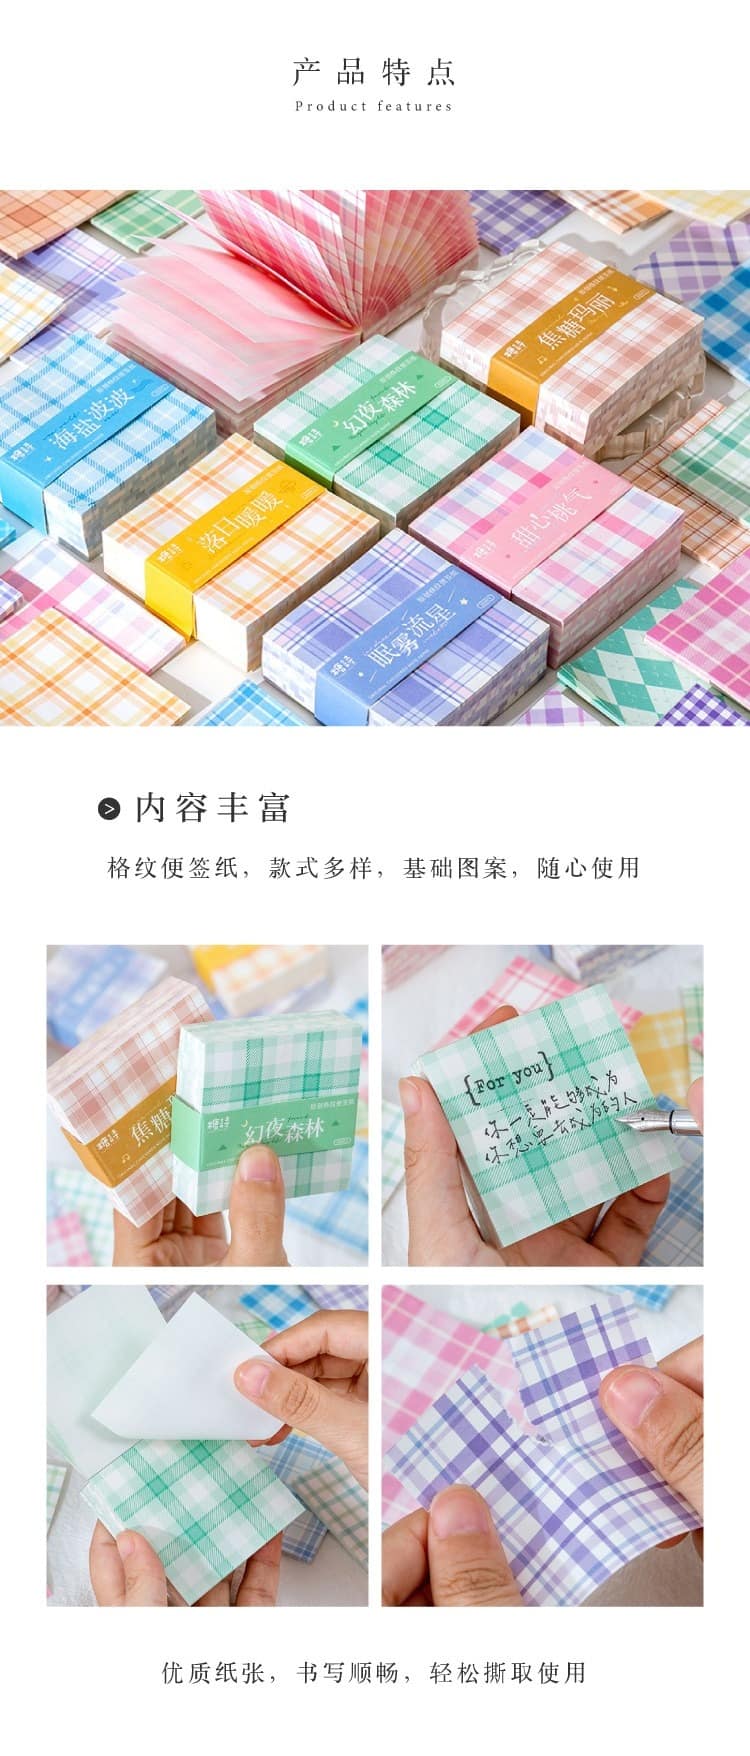 200 Pcs Colored Grid Pattern Memo Notes Writing Pads Scrapbook Decorations For Office School Stationery And Home Decor